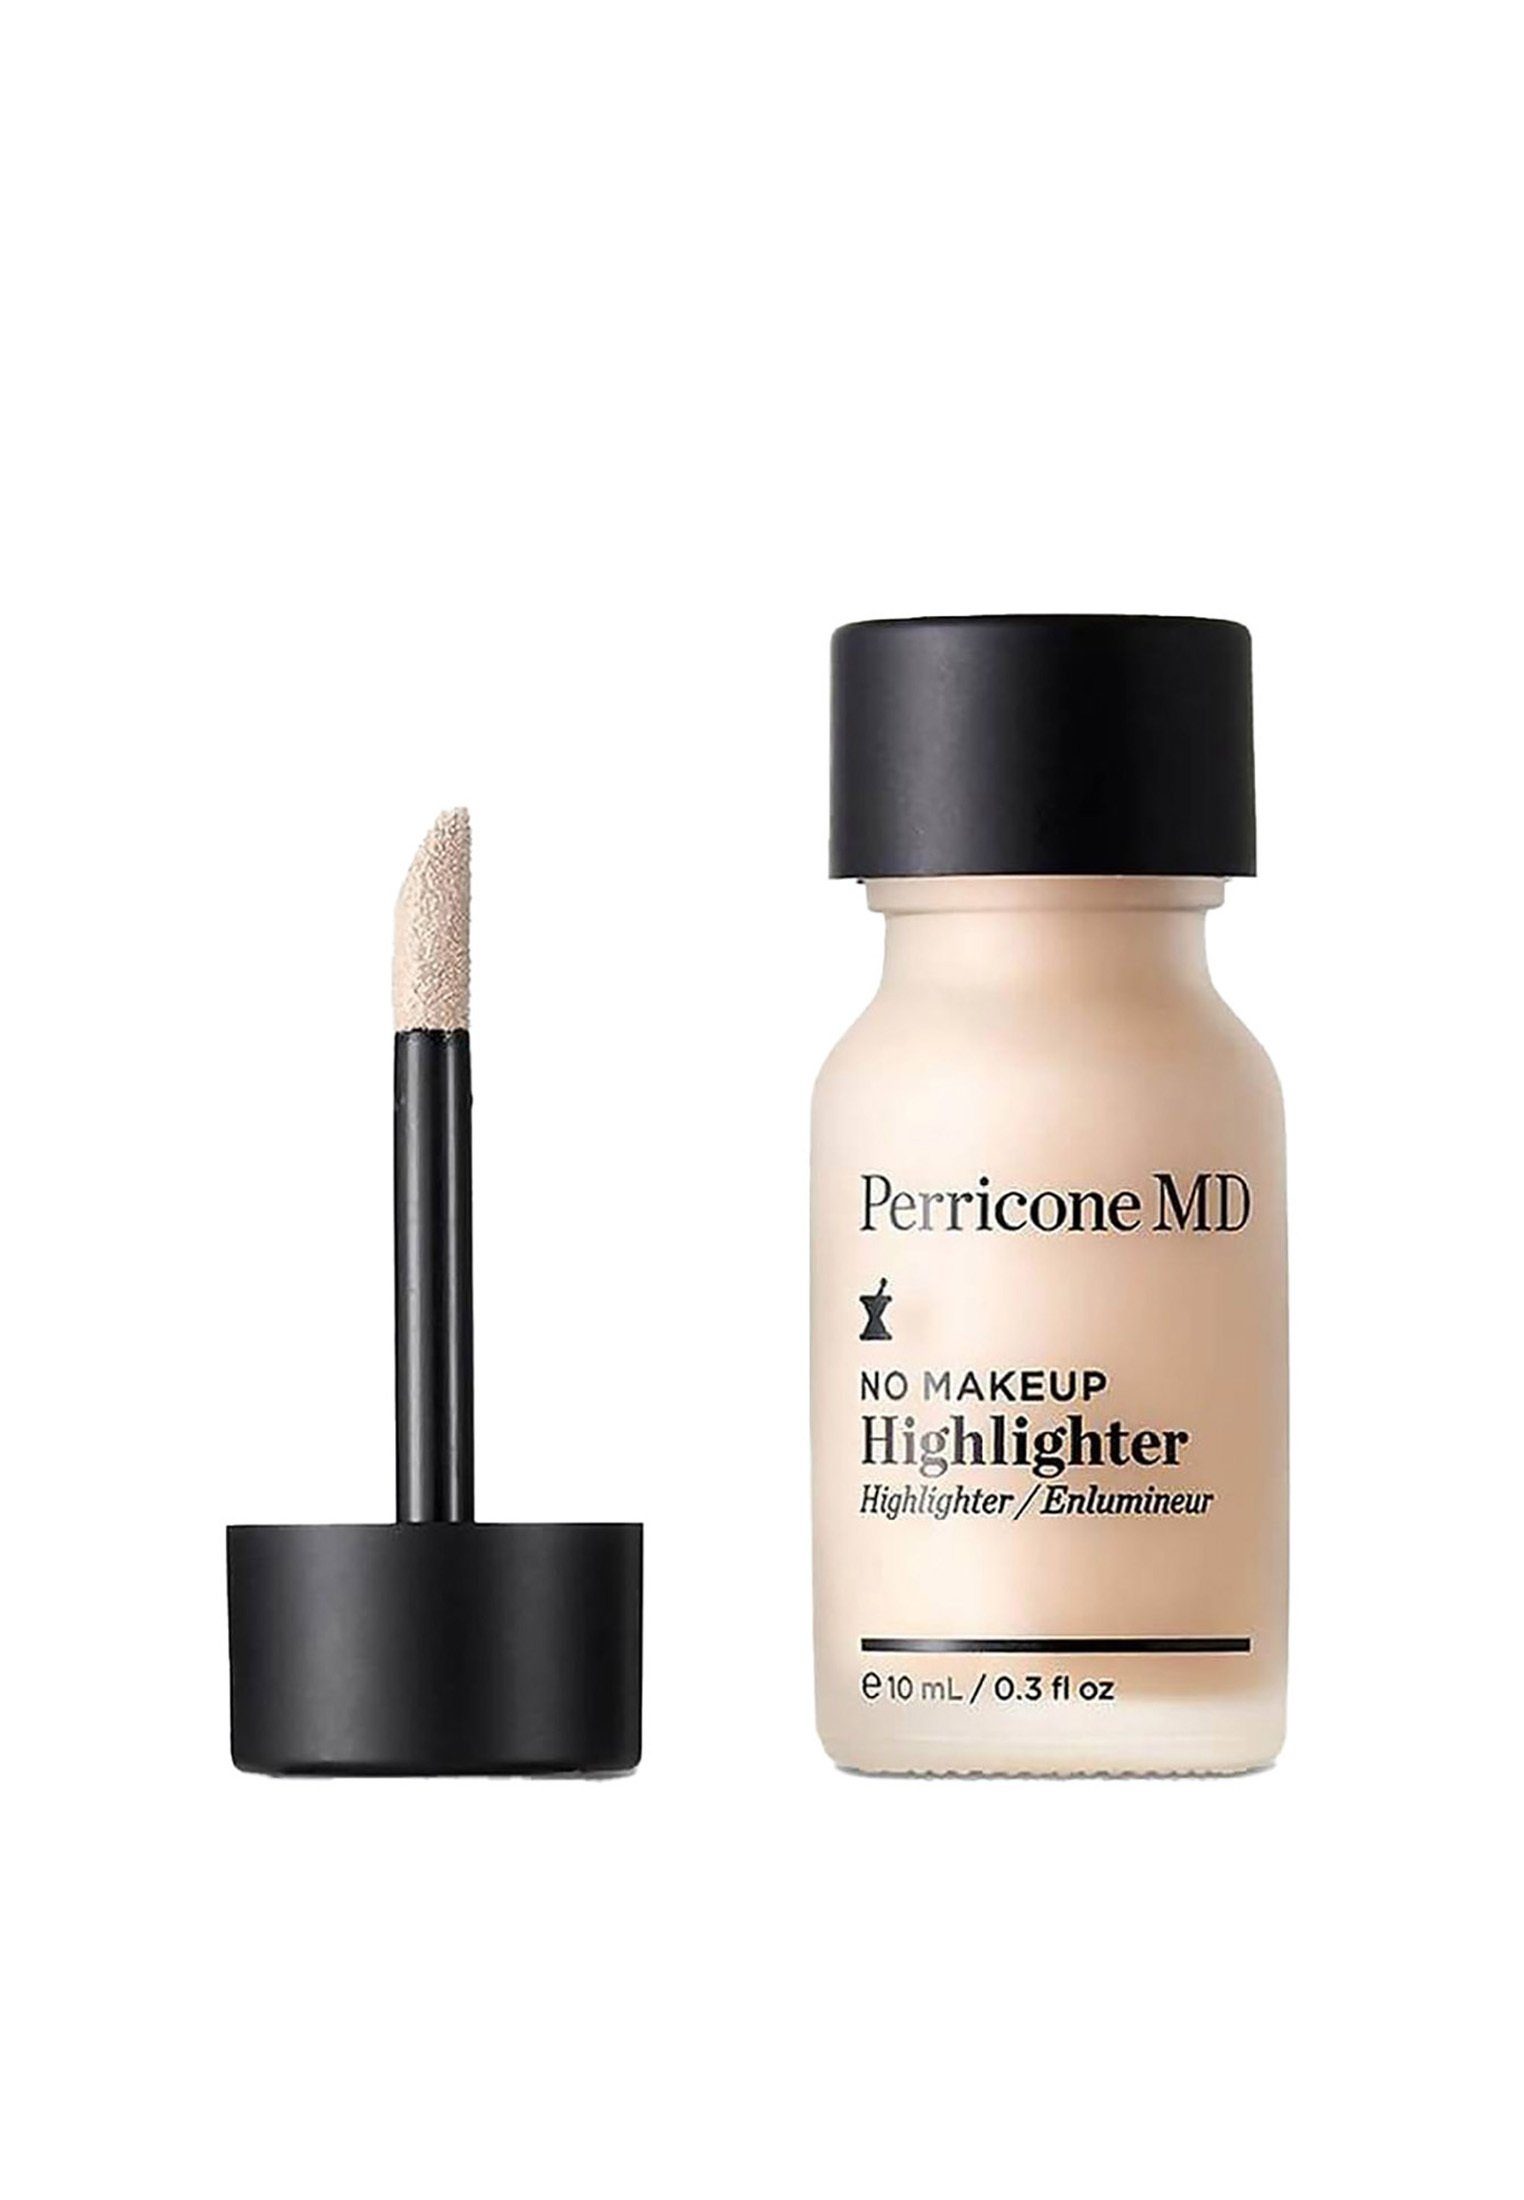 PERRICONE Highlighter PERRICONE Highlighter No Makeup Highlighter